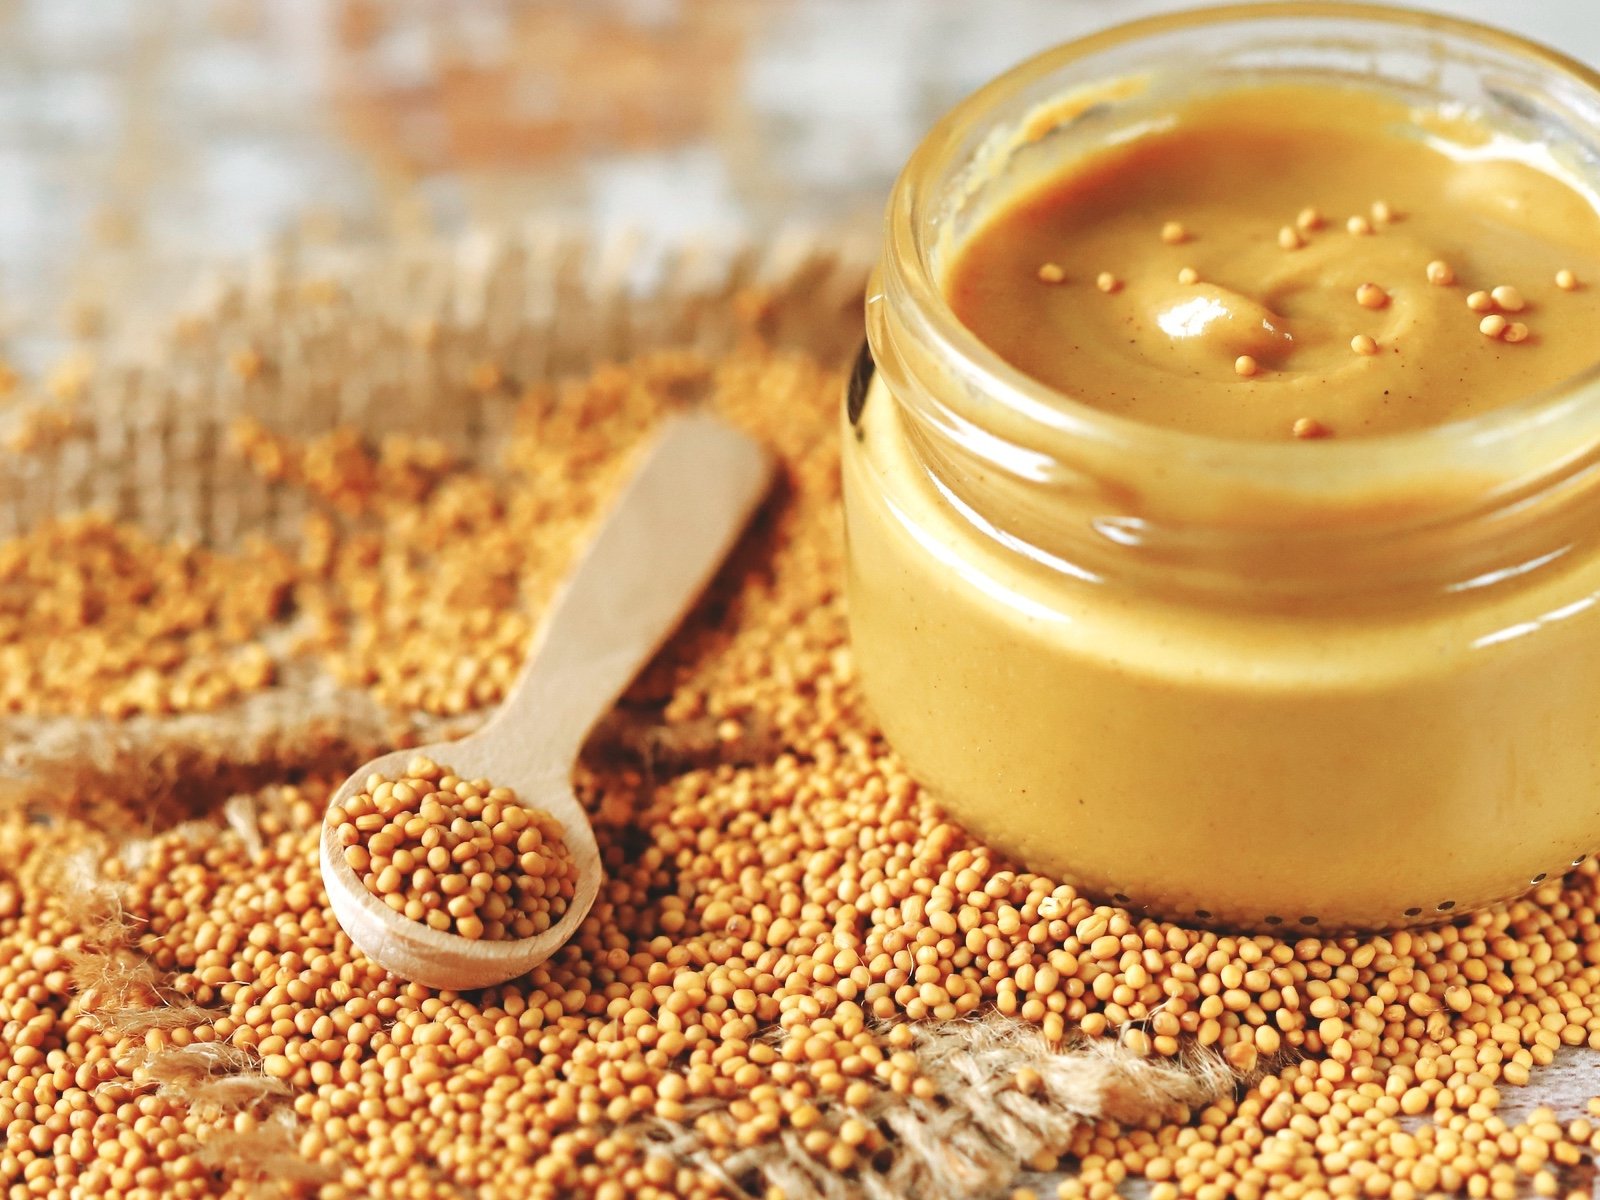 Mustard&nbsp;is a popular condiment made from the seeds of the&nbsp;mustard&nbsp;plant.&nbsp;